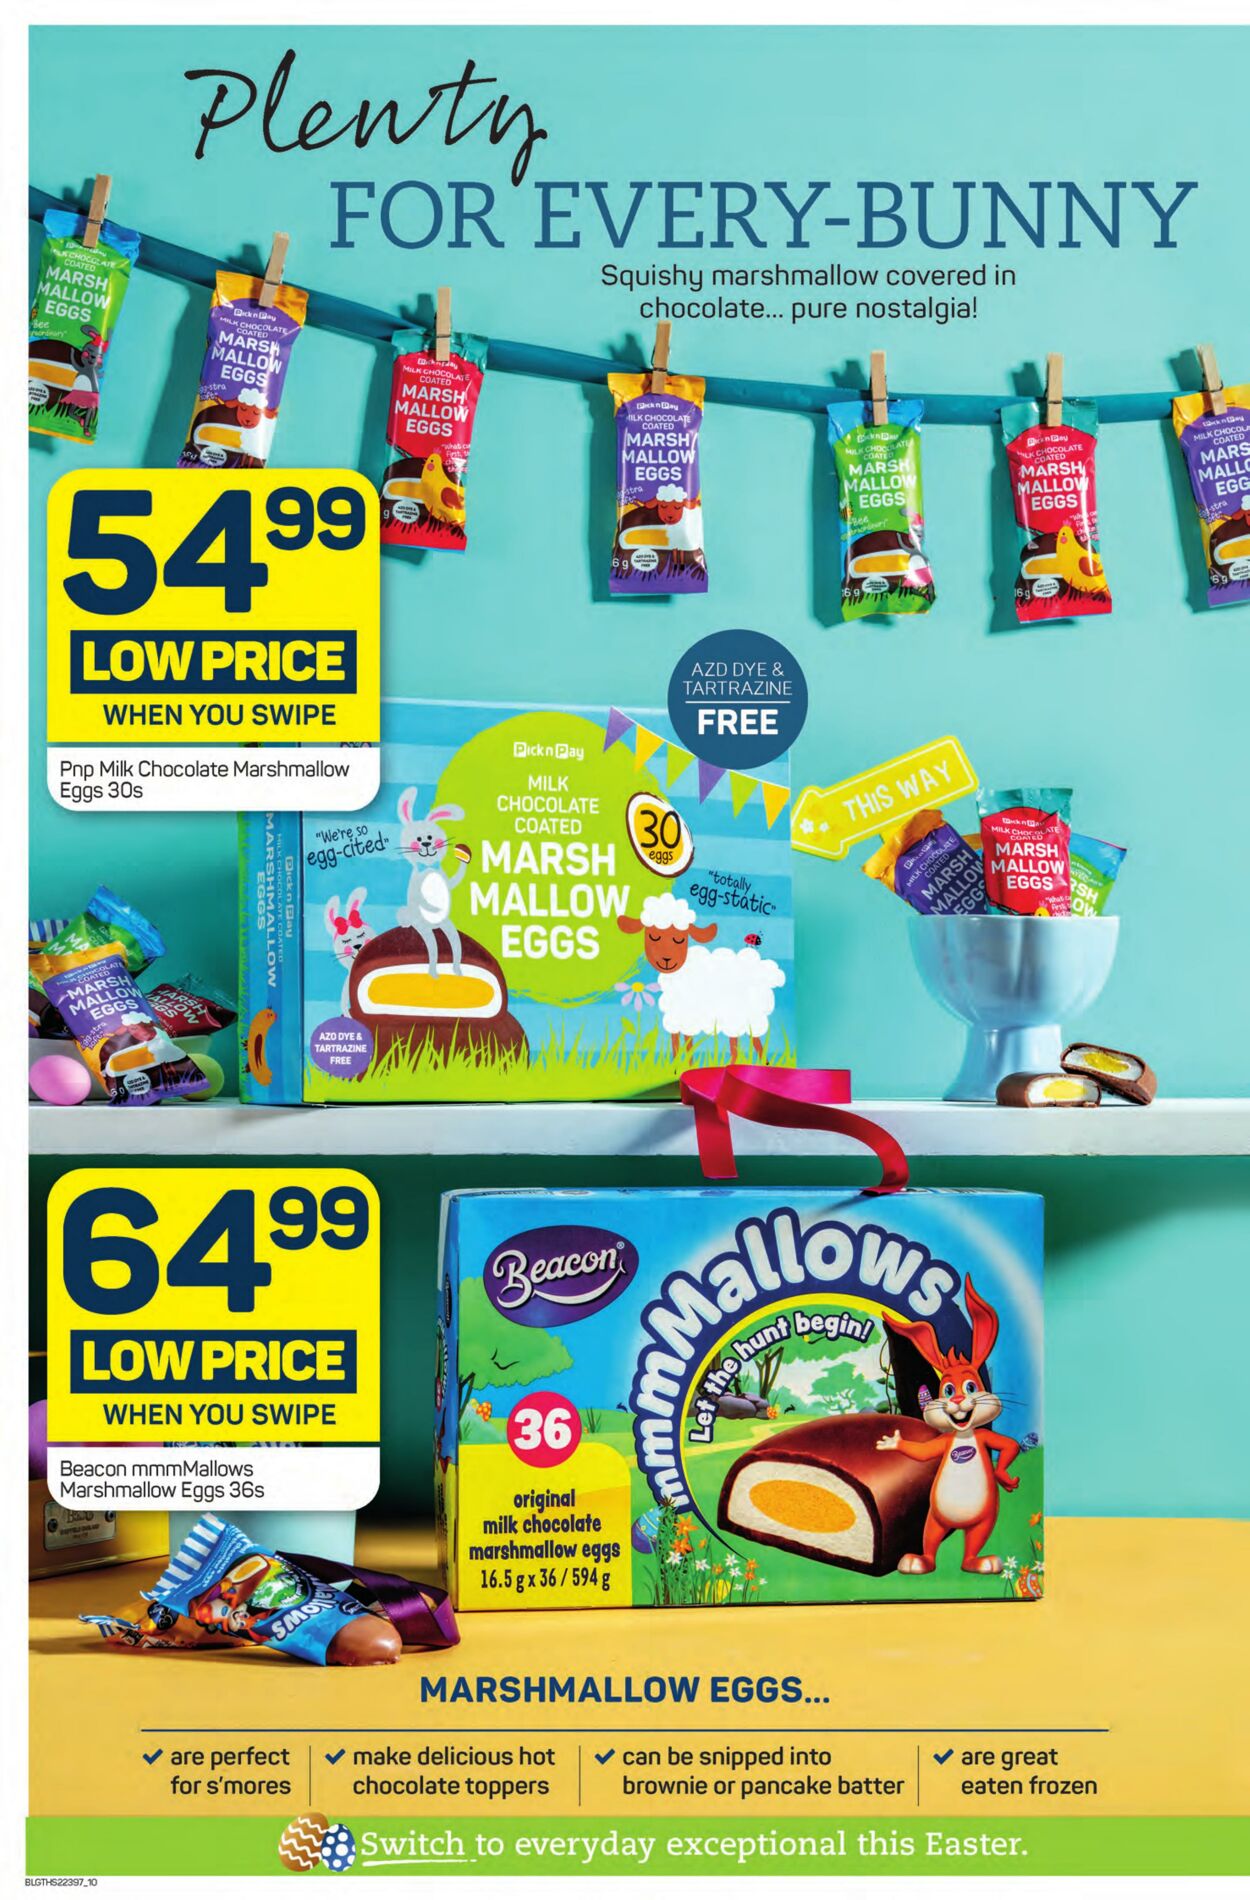 Pick n Pay Promotional Leaflet Easter Valid from 03.04 to 10.04